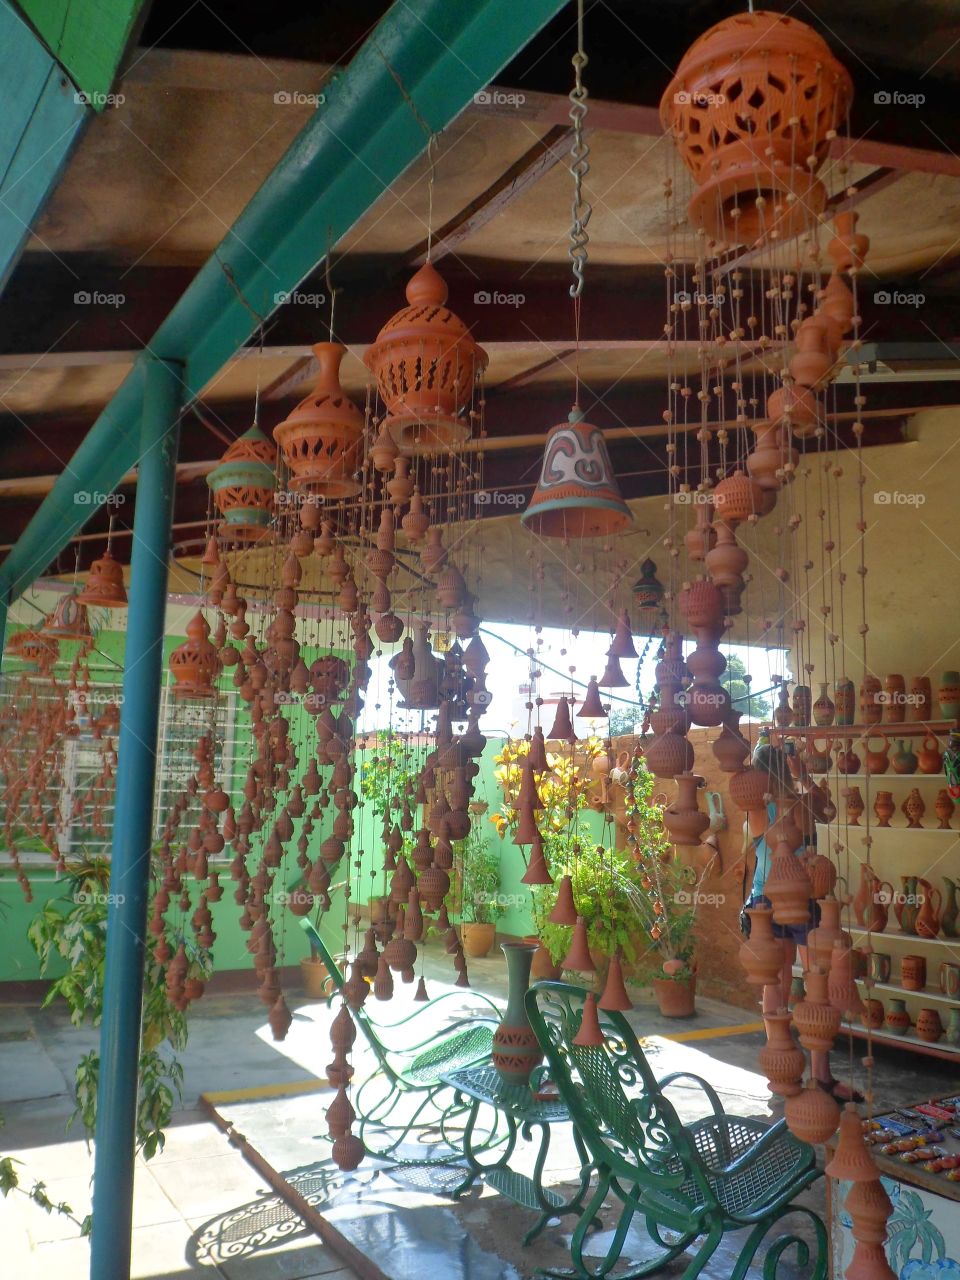 Clay wind chimes from Cuba